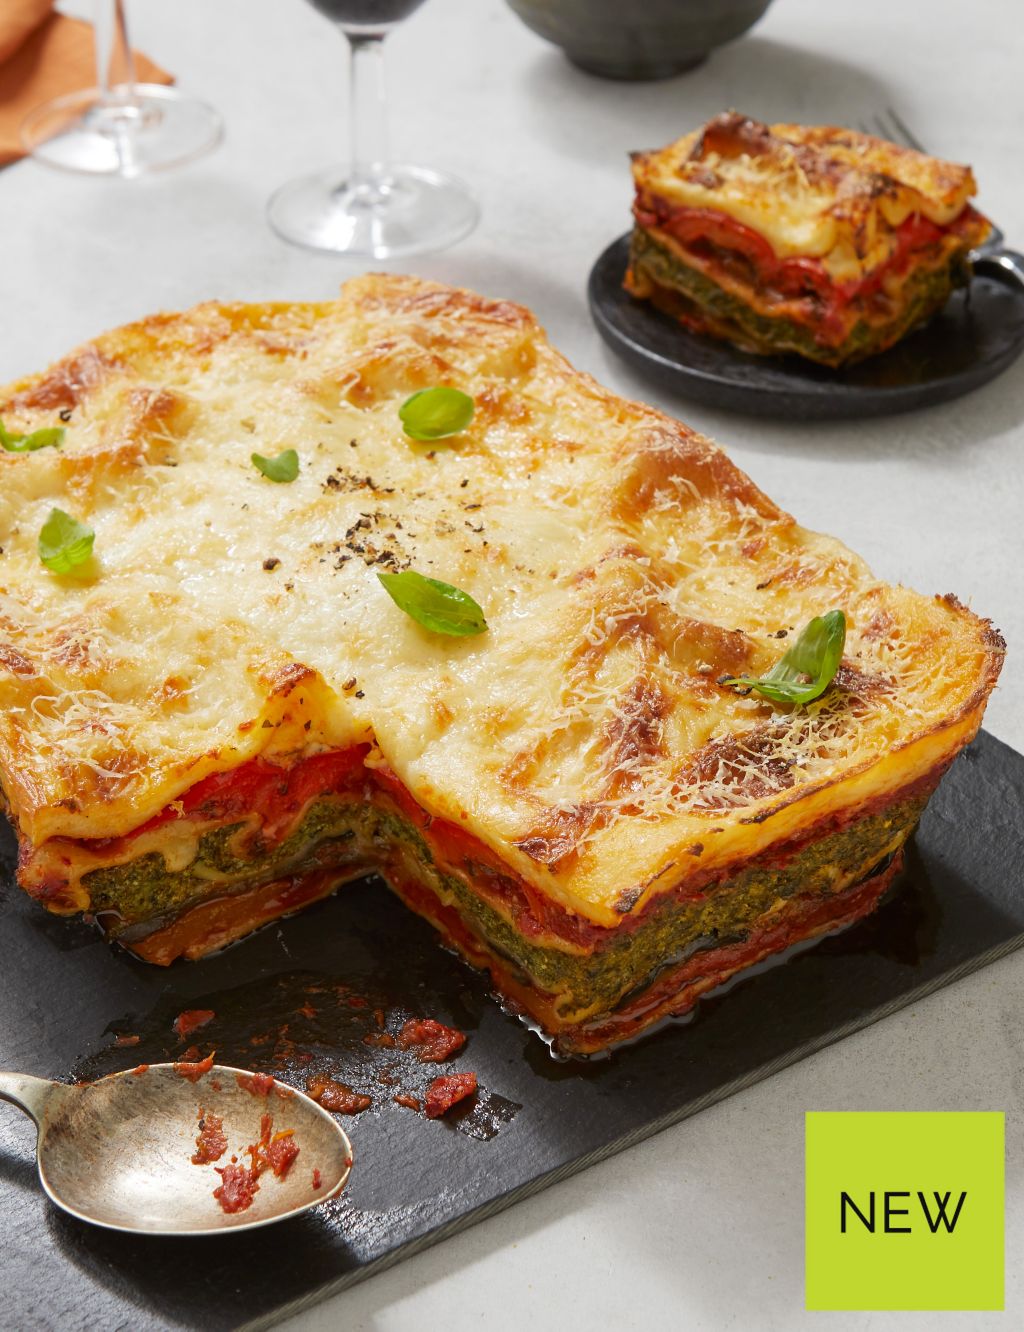 From The Deli Hand-Prepared Vegetable Lasagne (Serves 6) 3 of 4